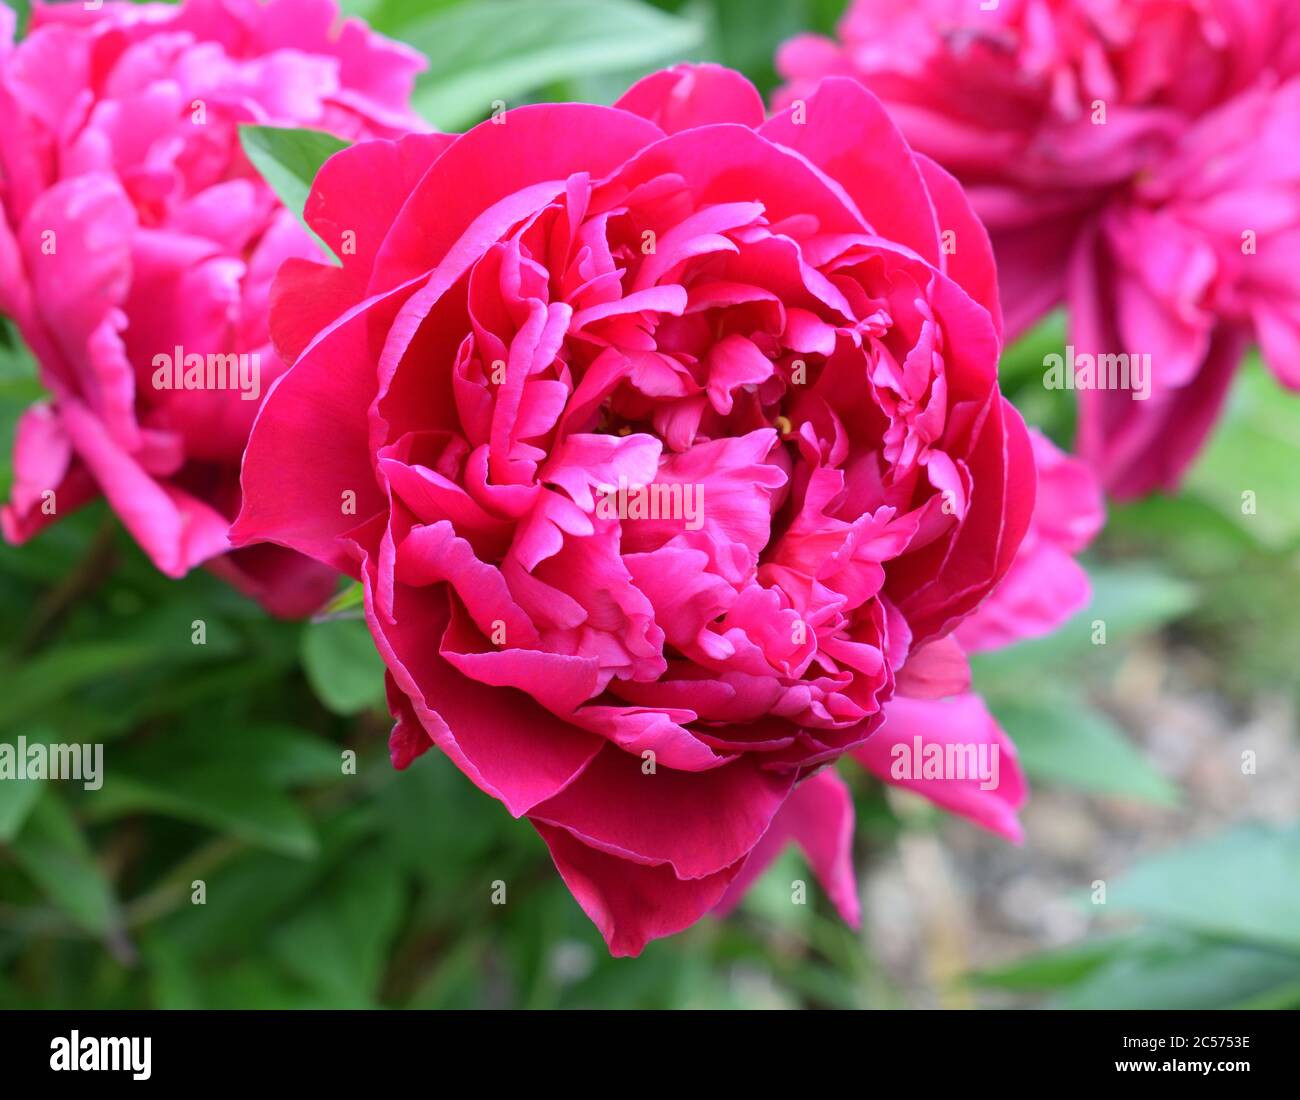 Peony or Paeonia lactiflora. Name Adolphe Rousseau. Close up of a large red flower. Stock Photo